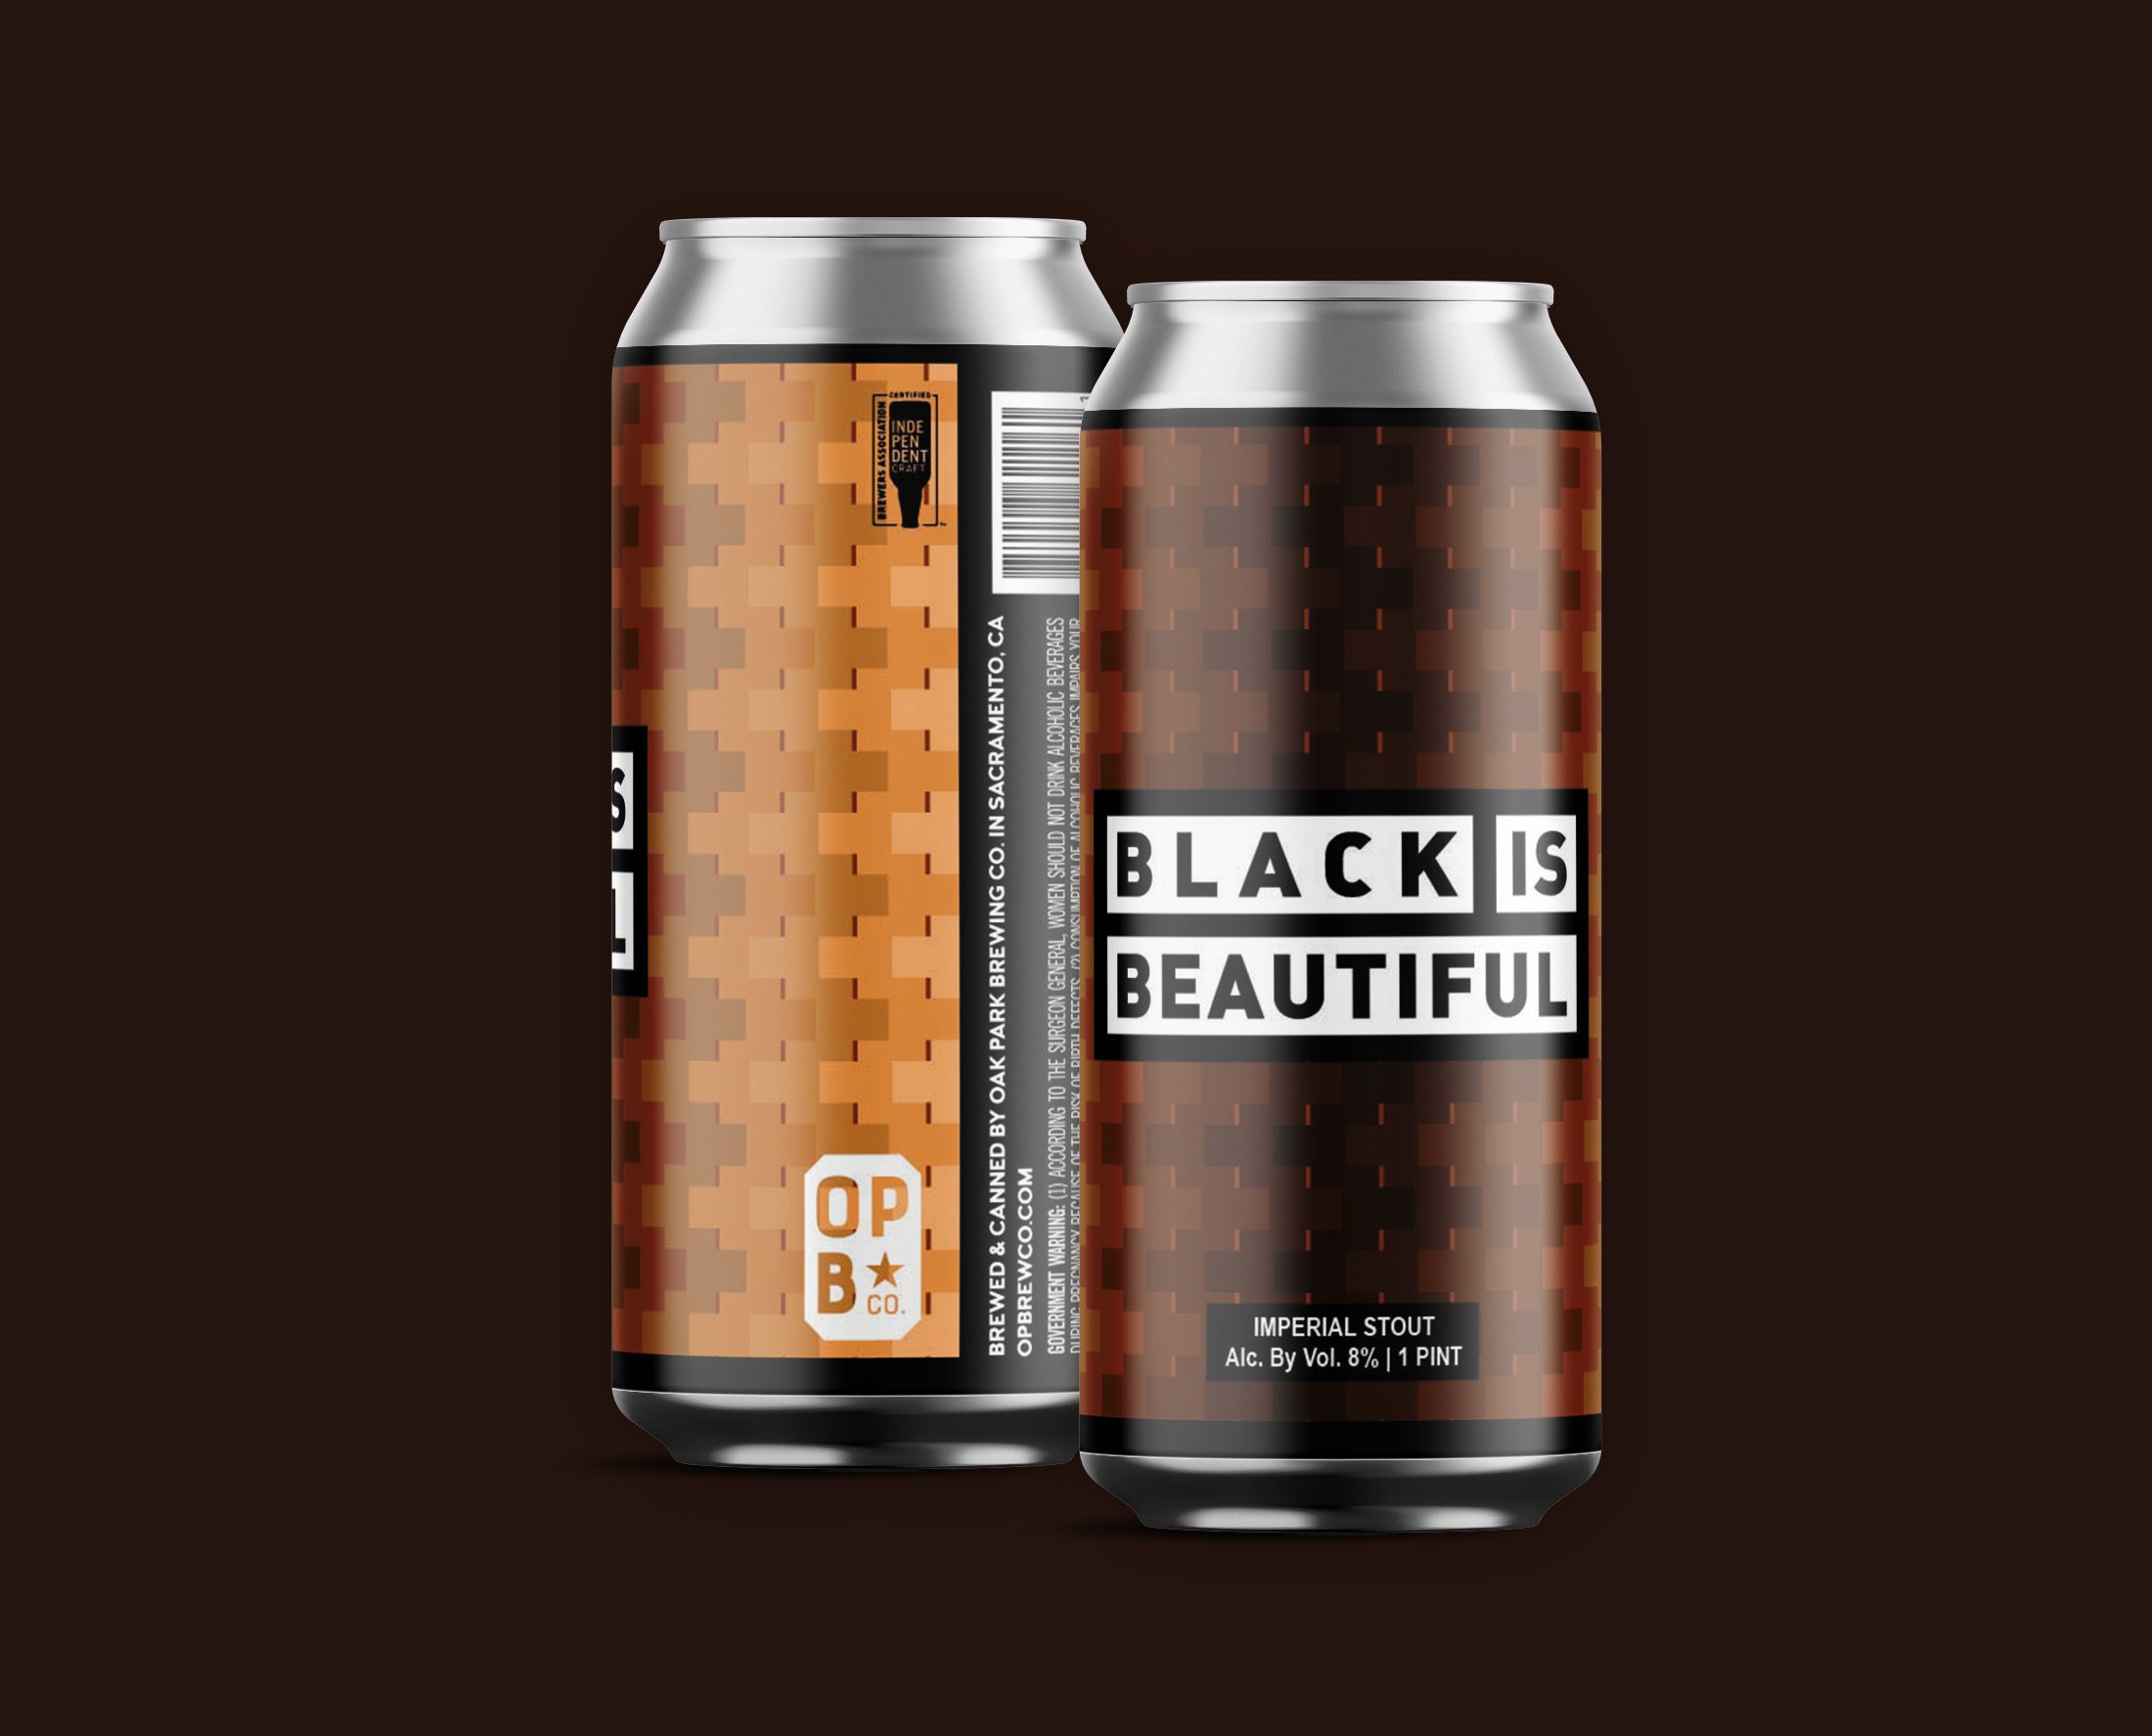 Digital rendering, of Black is Beautiful Imperial Stout beer can. Featuring 2 cans